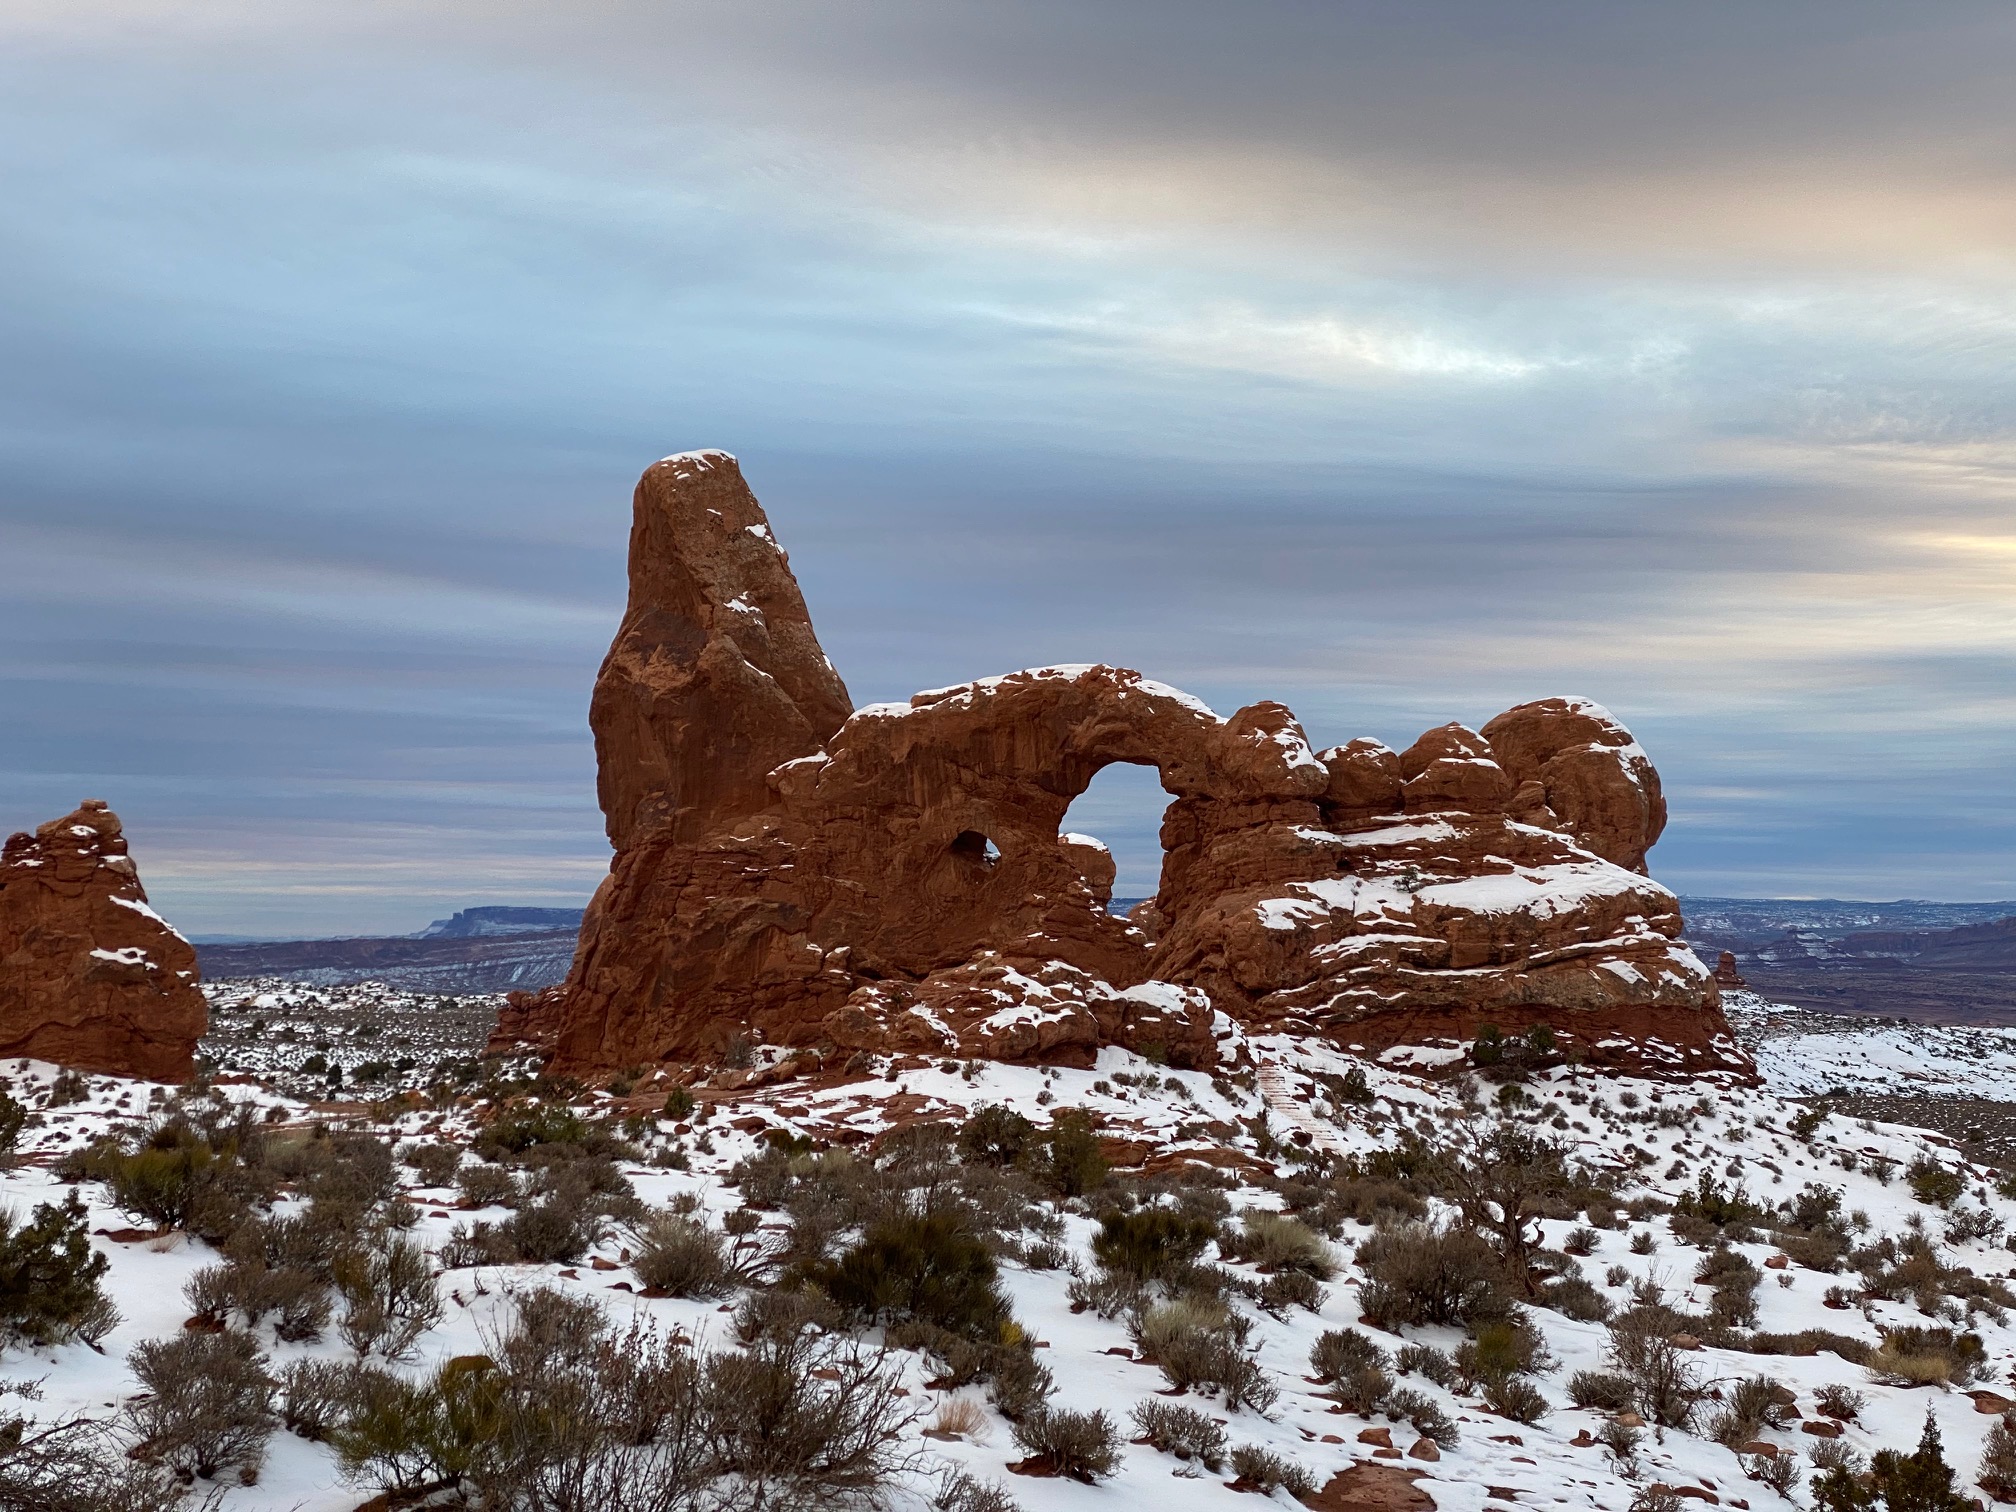 Overcast day at Arches National Park with some snow on the ground and one big rock formation with an arch.